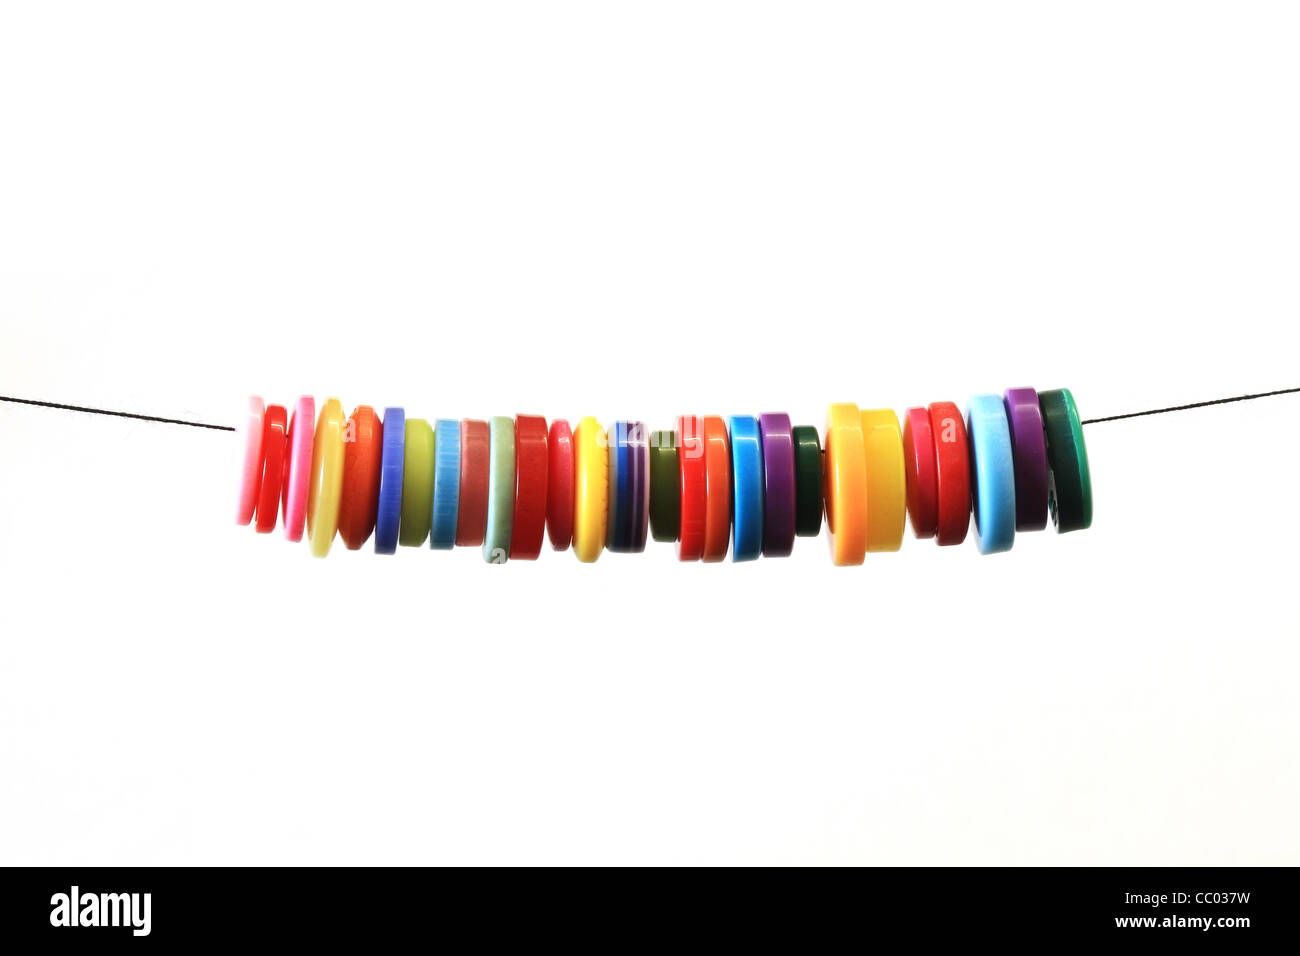 Colourful buttons on thread with a white background Stock Photo